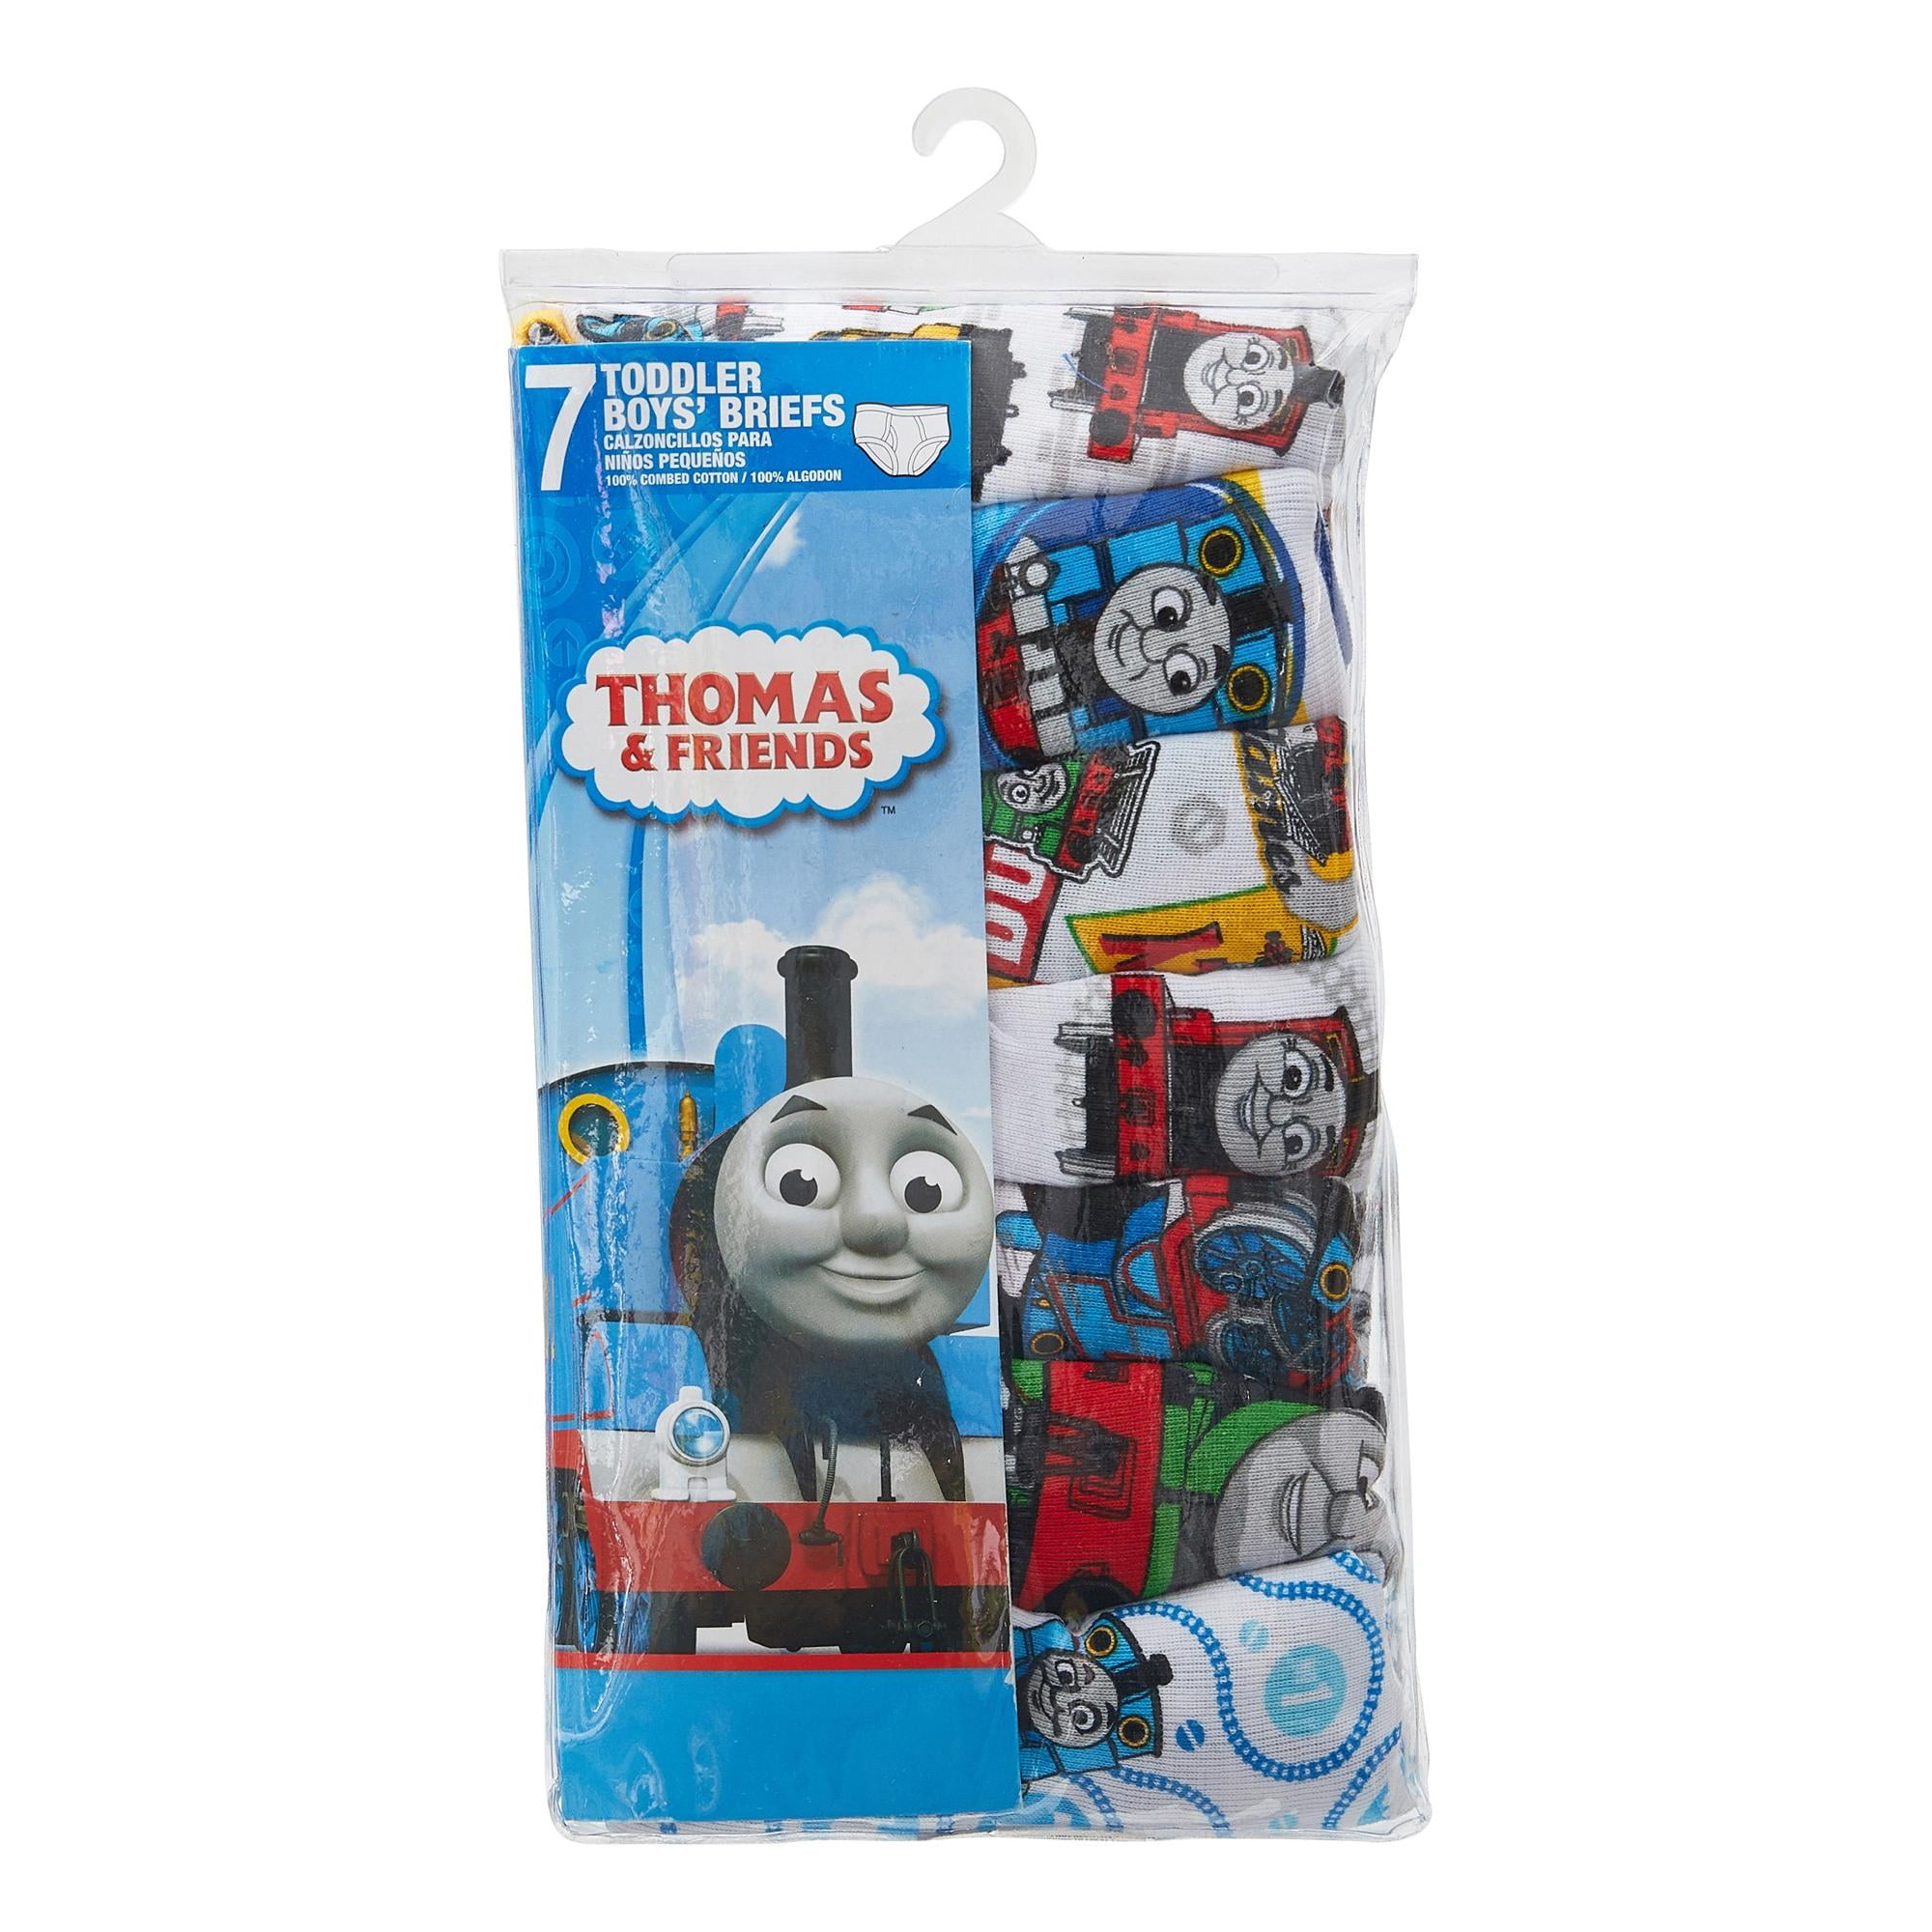 Thomas & Friends Boys Thomas the Tank Engine Briefs Ages 18 Months to 7 Years 